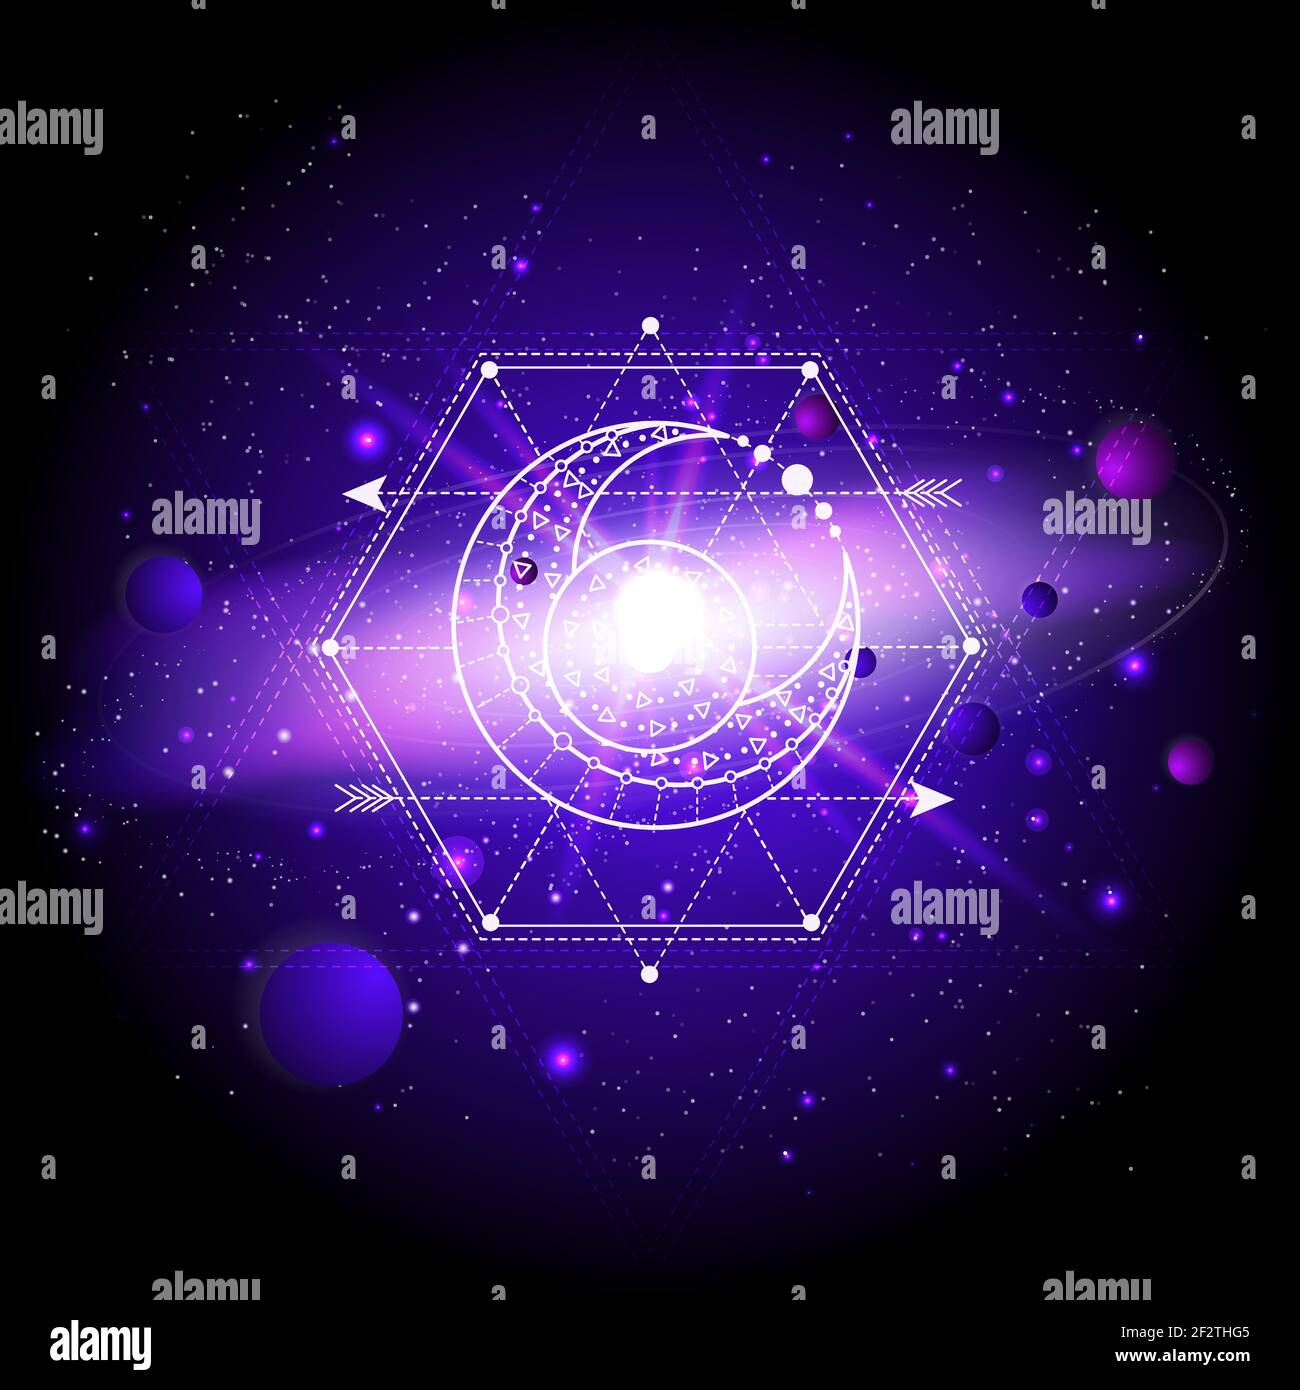 Vector illustration of Sacred or mystic symbol against the space background with planets and stars. Abstract geometric signs drawn in lines. Multicolo Stock Vector